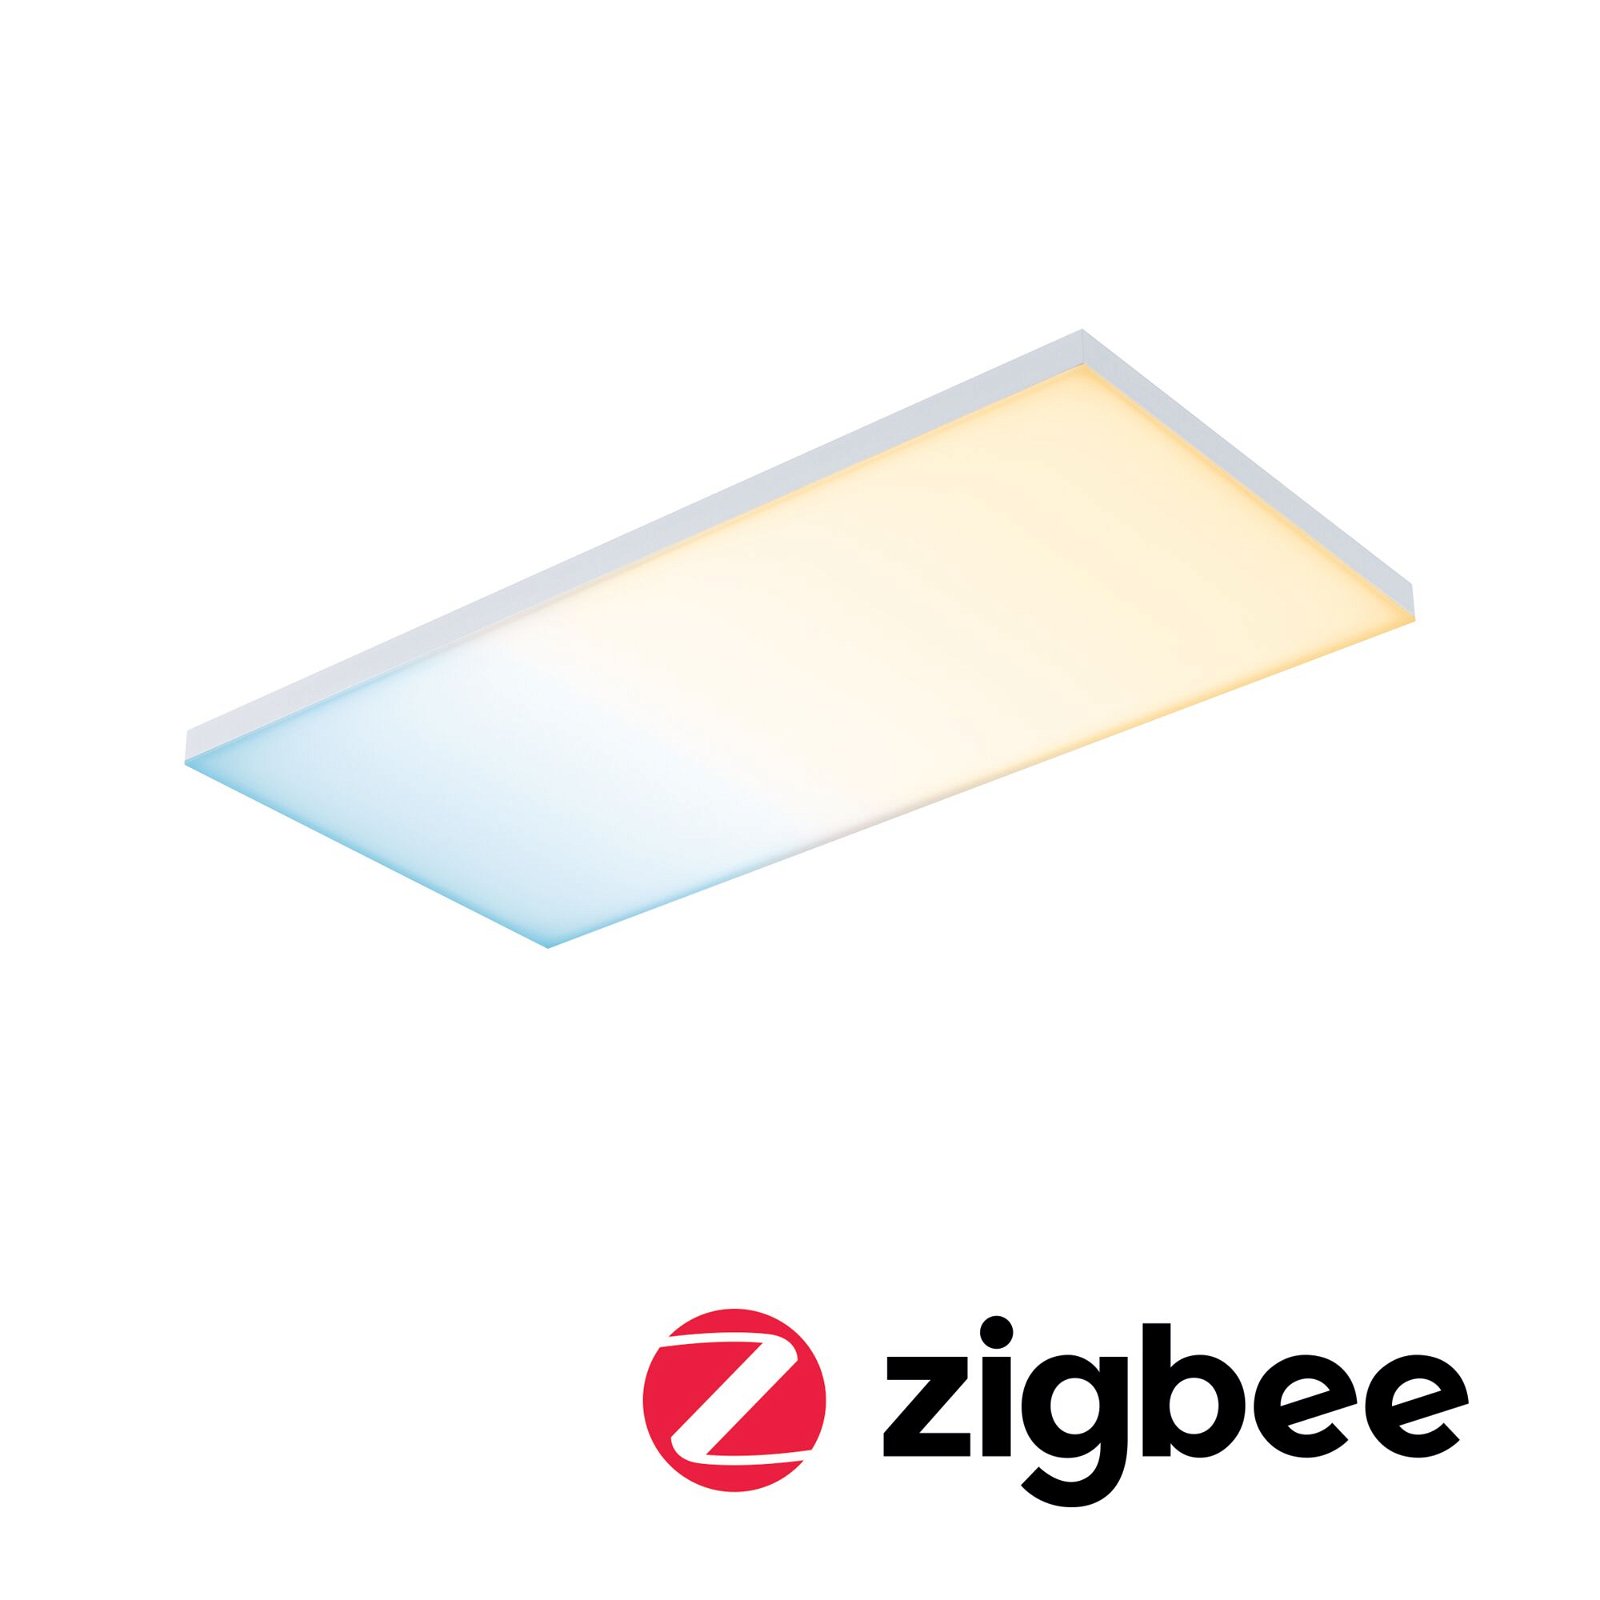 LED Panel Smart Home Zigbee Velora square 595x295mm 15,5W 1600lm Tunable White Matt white dimmable